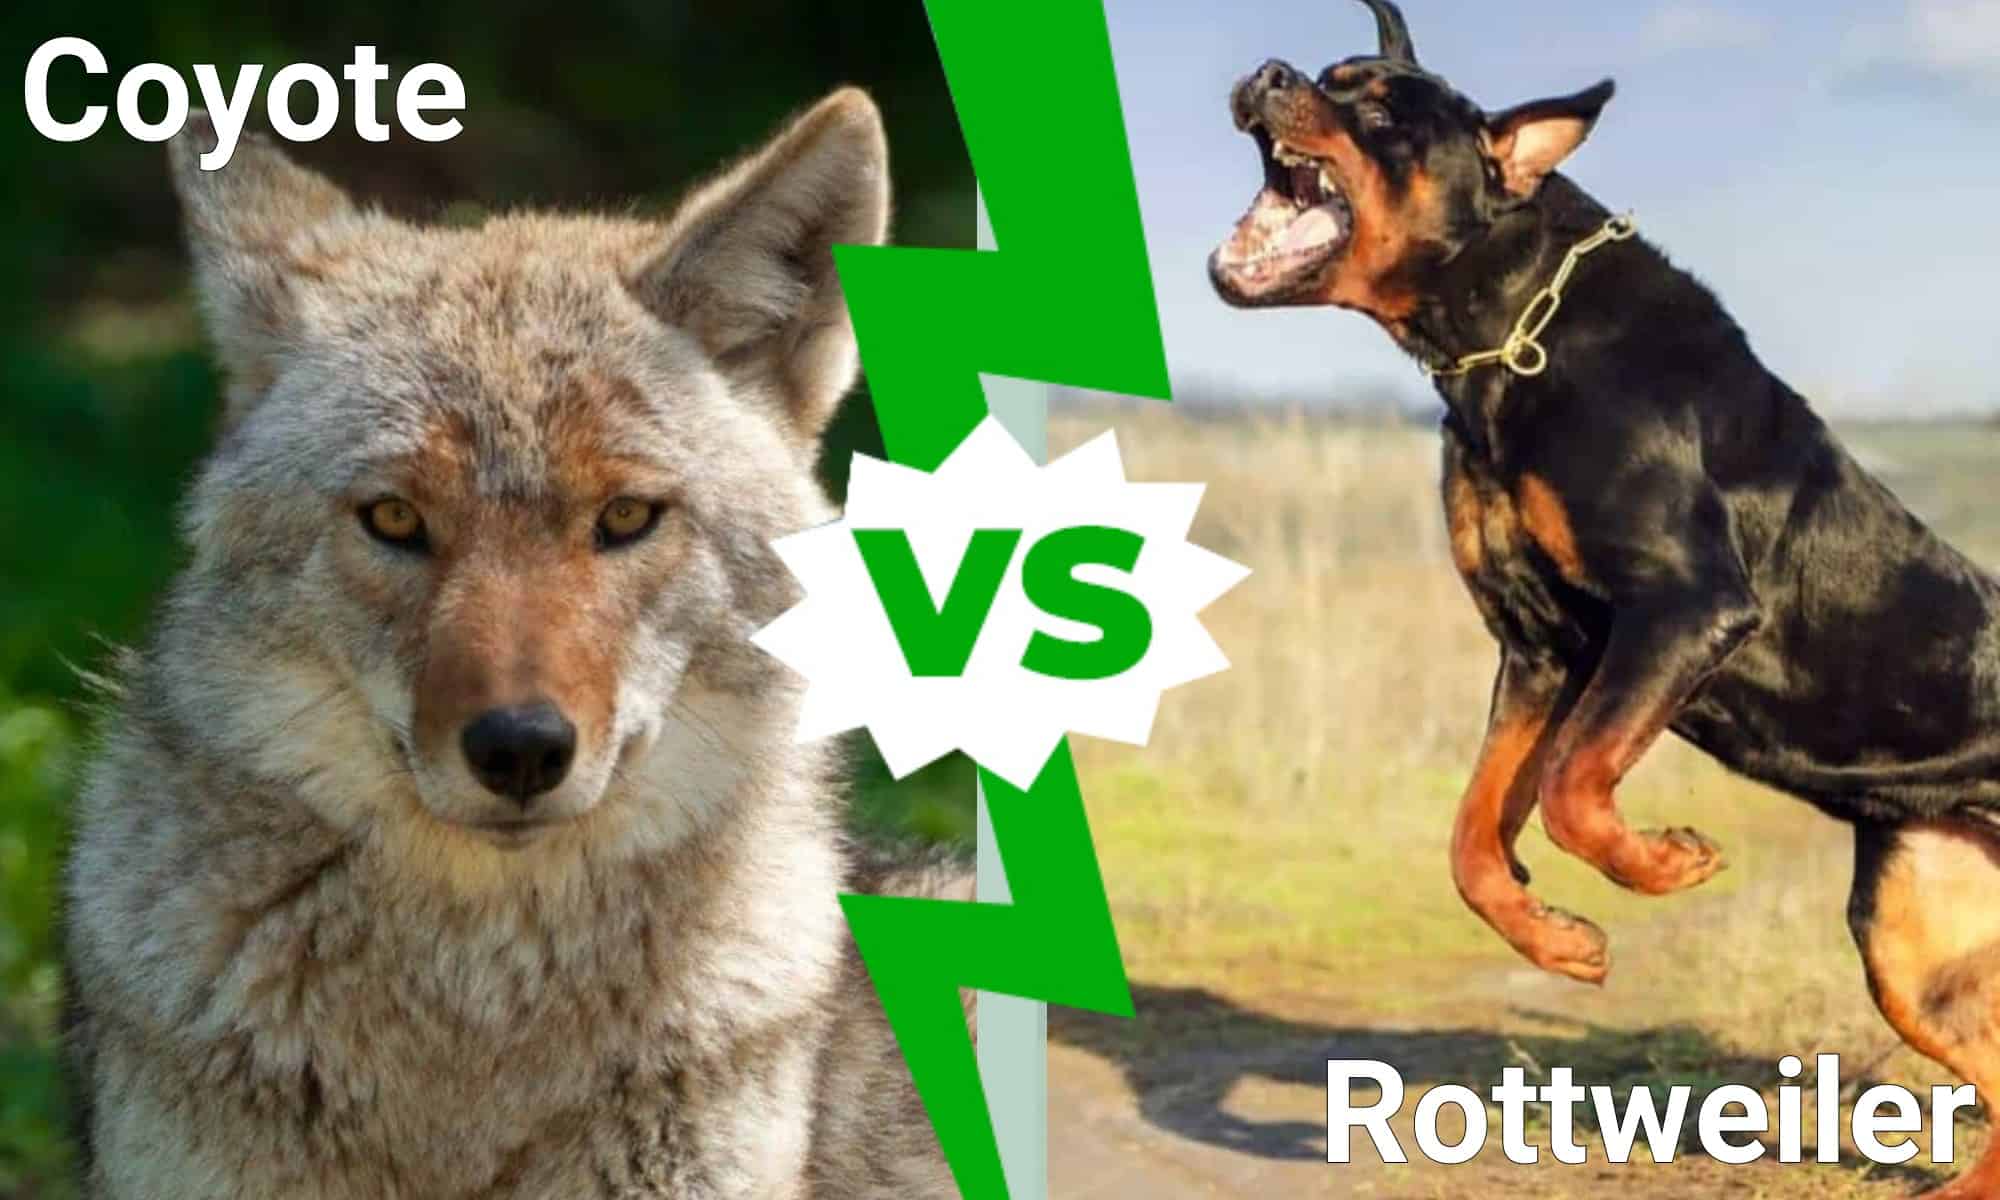 what animals can a rottweiler kill? 2